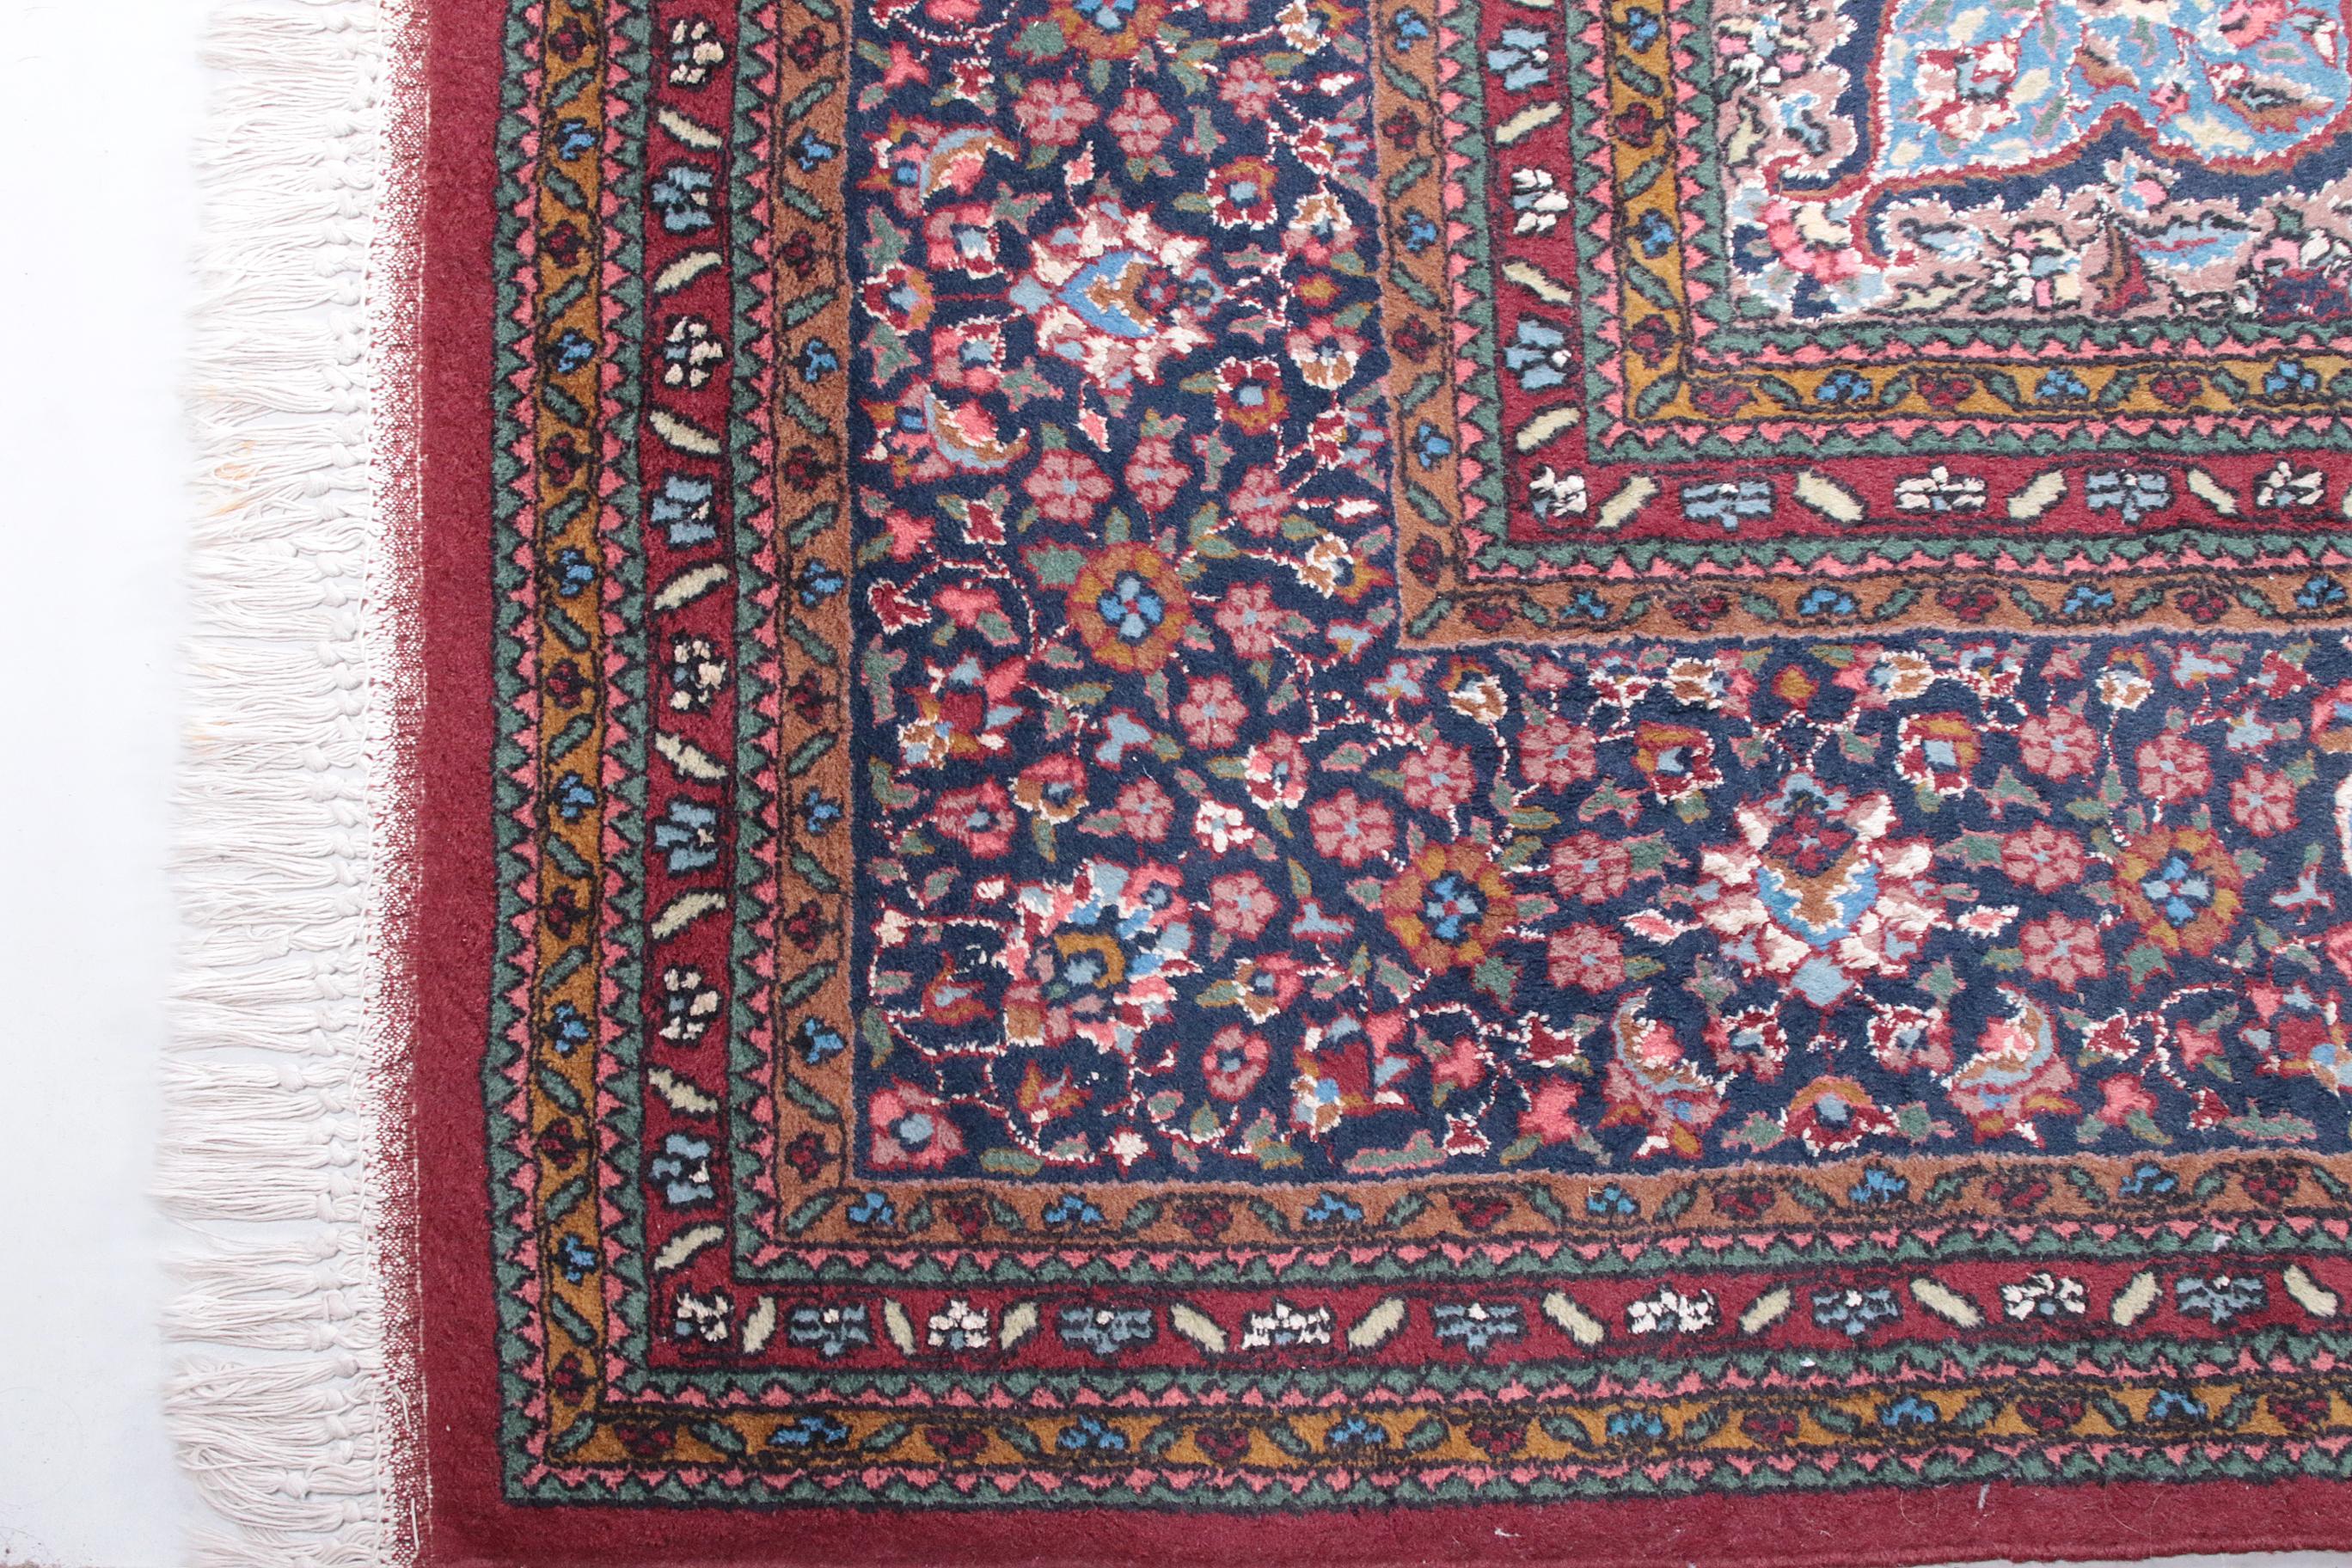 This beautiful Persian Bidjar carpet has 400,000 knots per square meter. It is a beautiful and typical example of a Bidjar carpet. Unlike the rugs of other nomadic peoples, the structure of a Bidjar makes it one of the strongest types of Persian